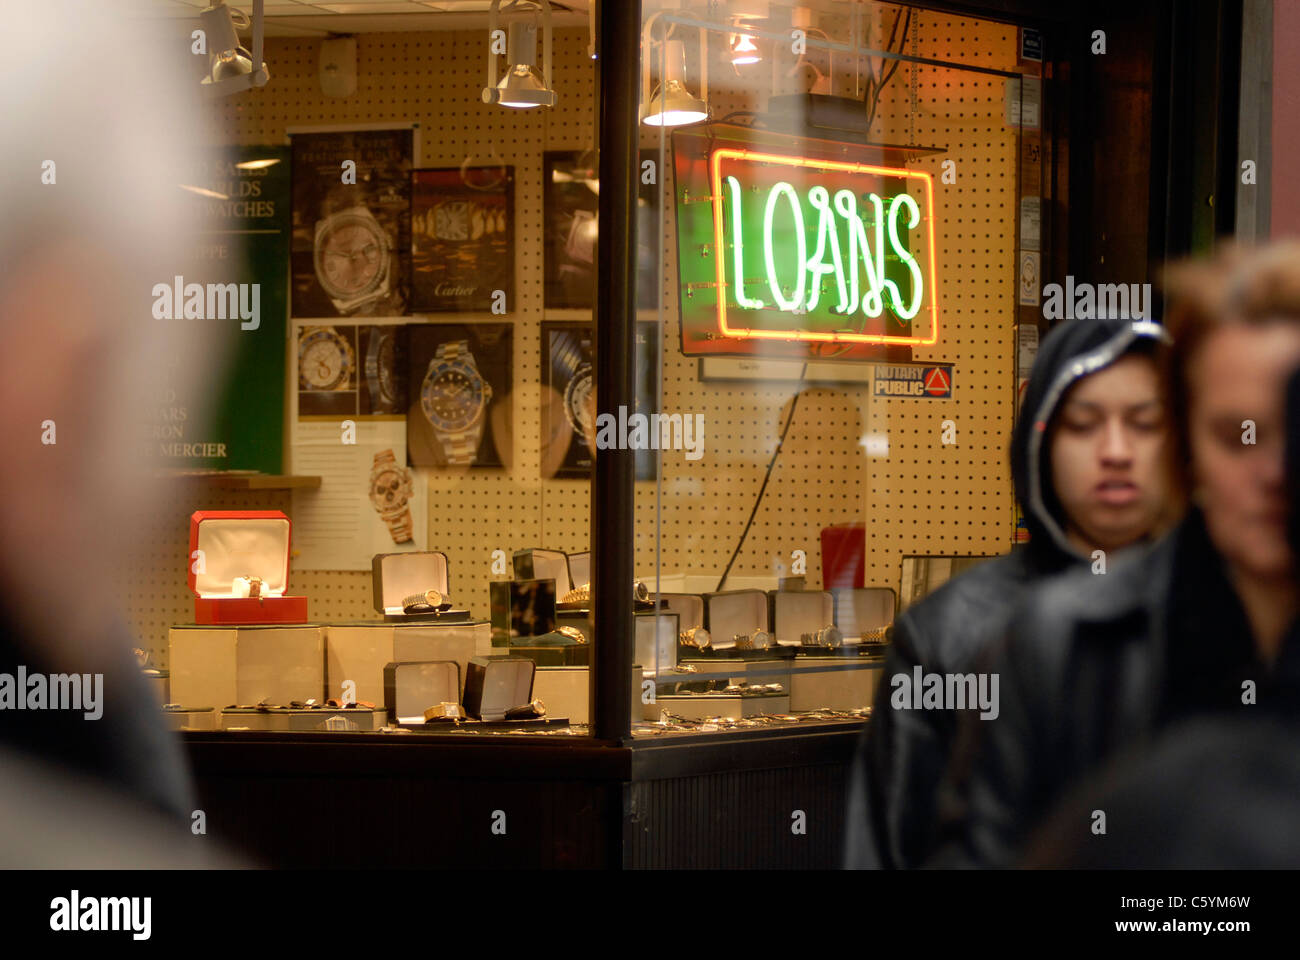 Pawnbroker in New York is seen on Tuesday, January 6, 2009 Stock Photo